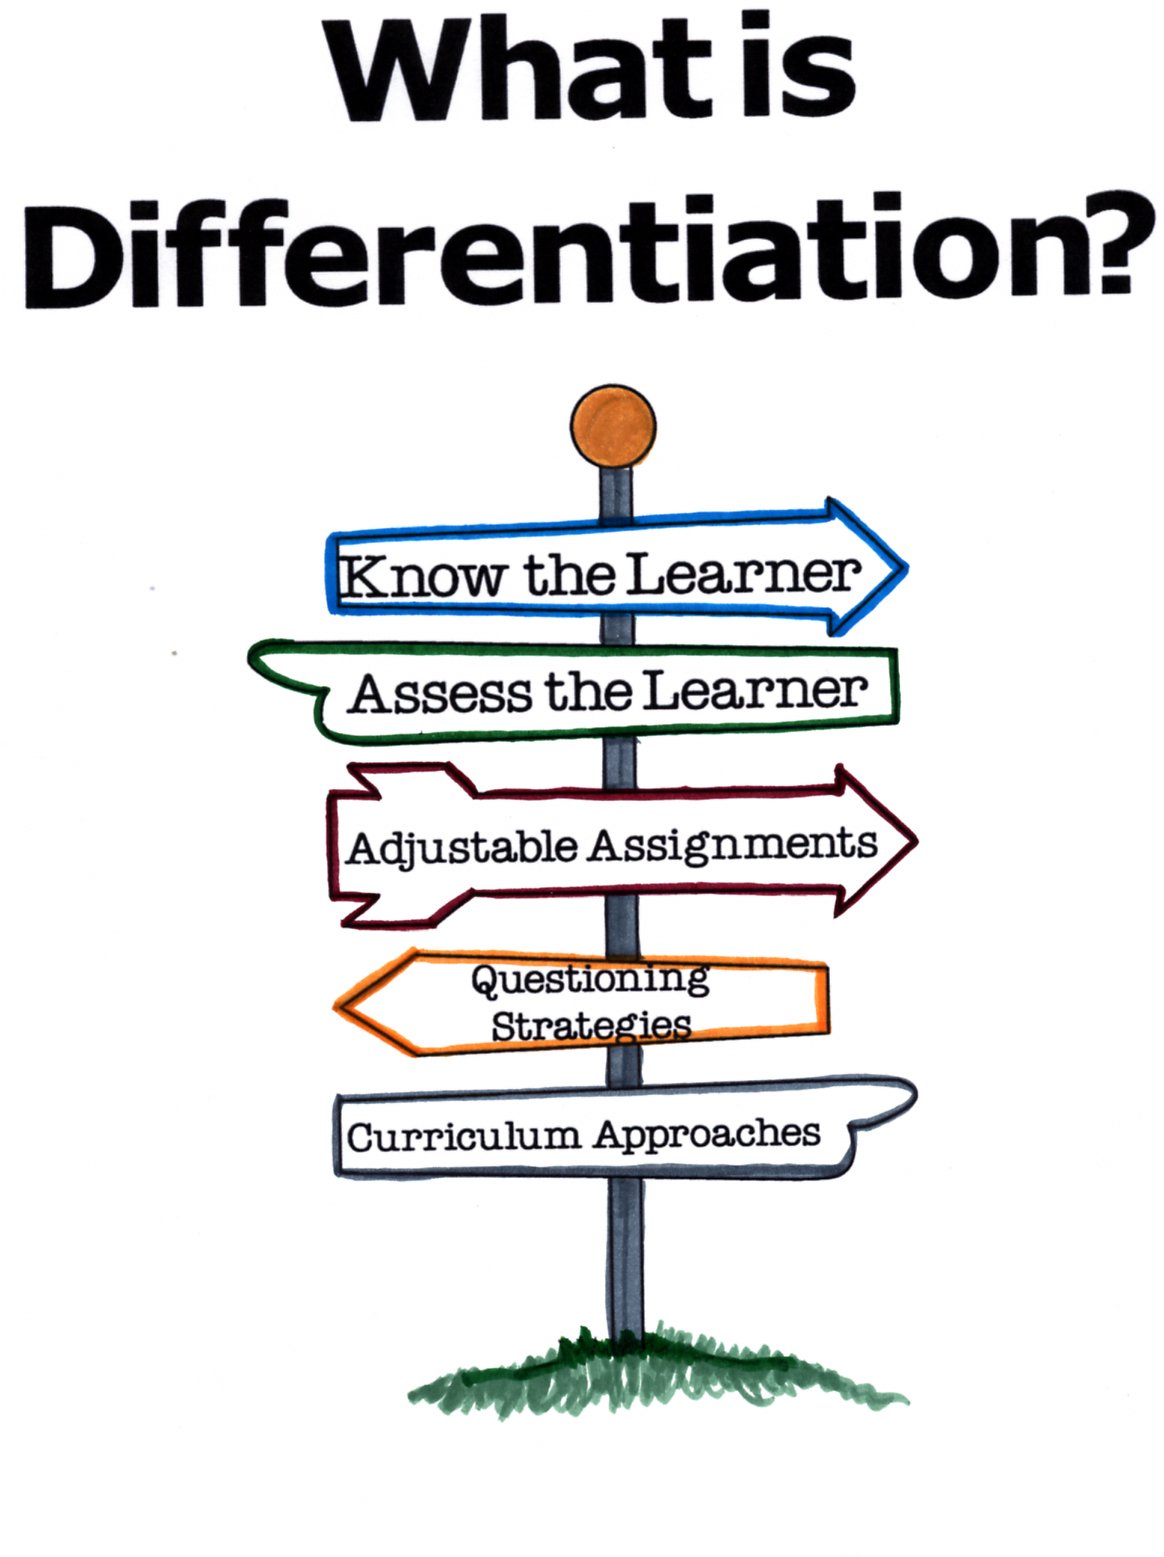 differentiated learning quotes